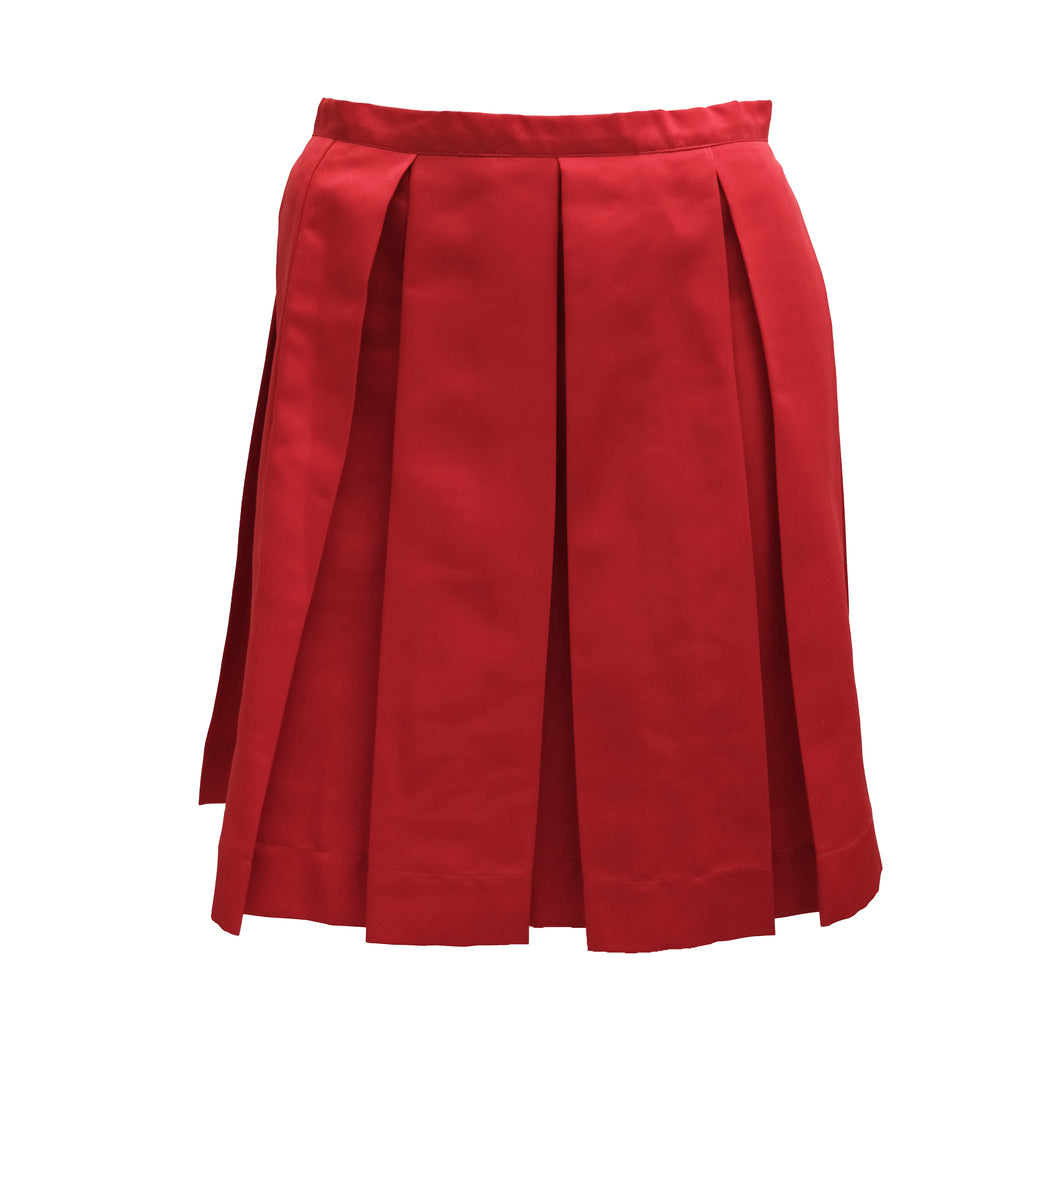 Justin Case Pleated Skirt in Red Satin, UK10